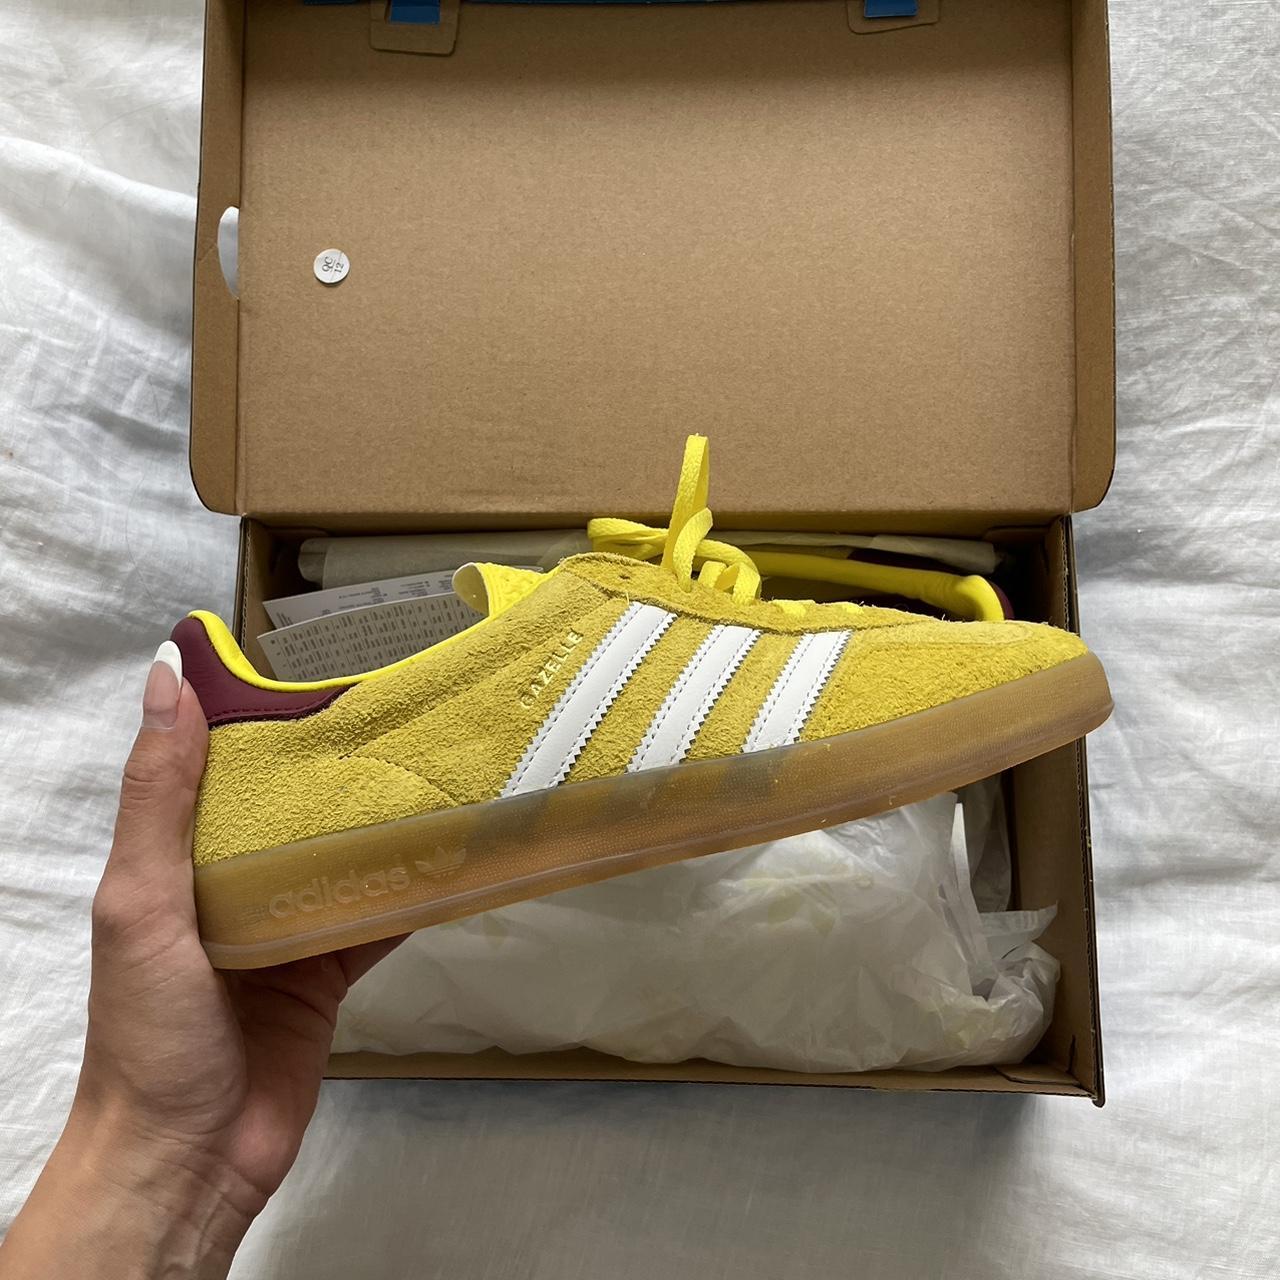 Selling these stunning Adidas Gazelles in Bright... - Depop